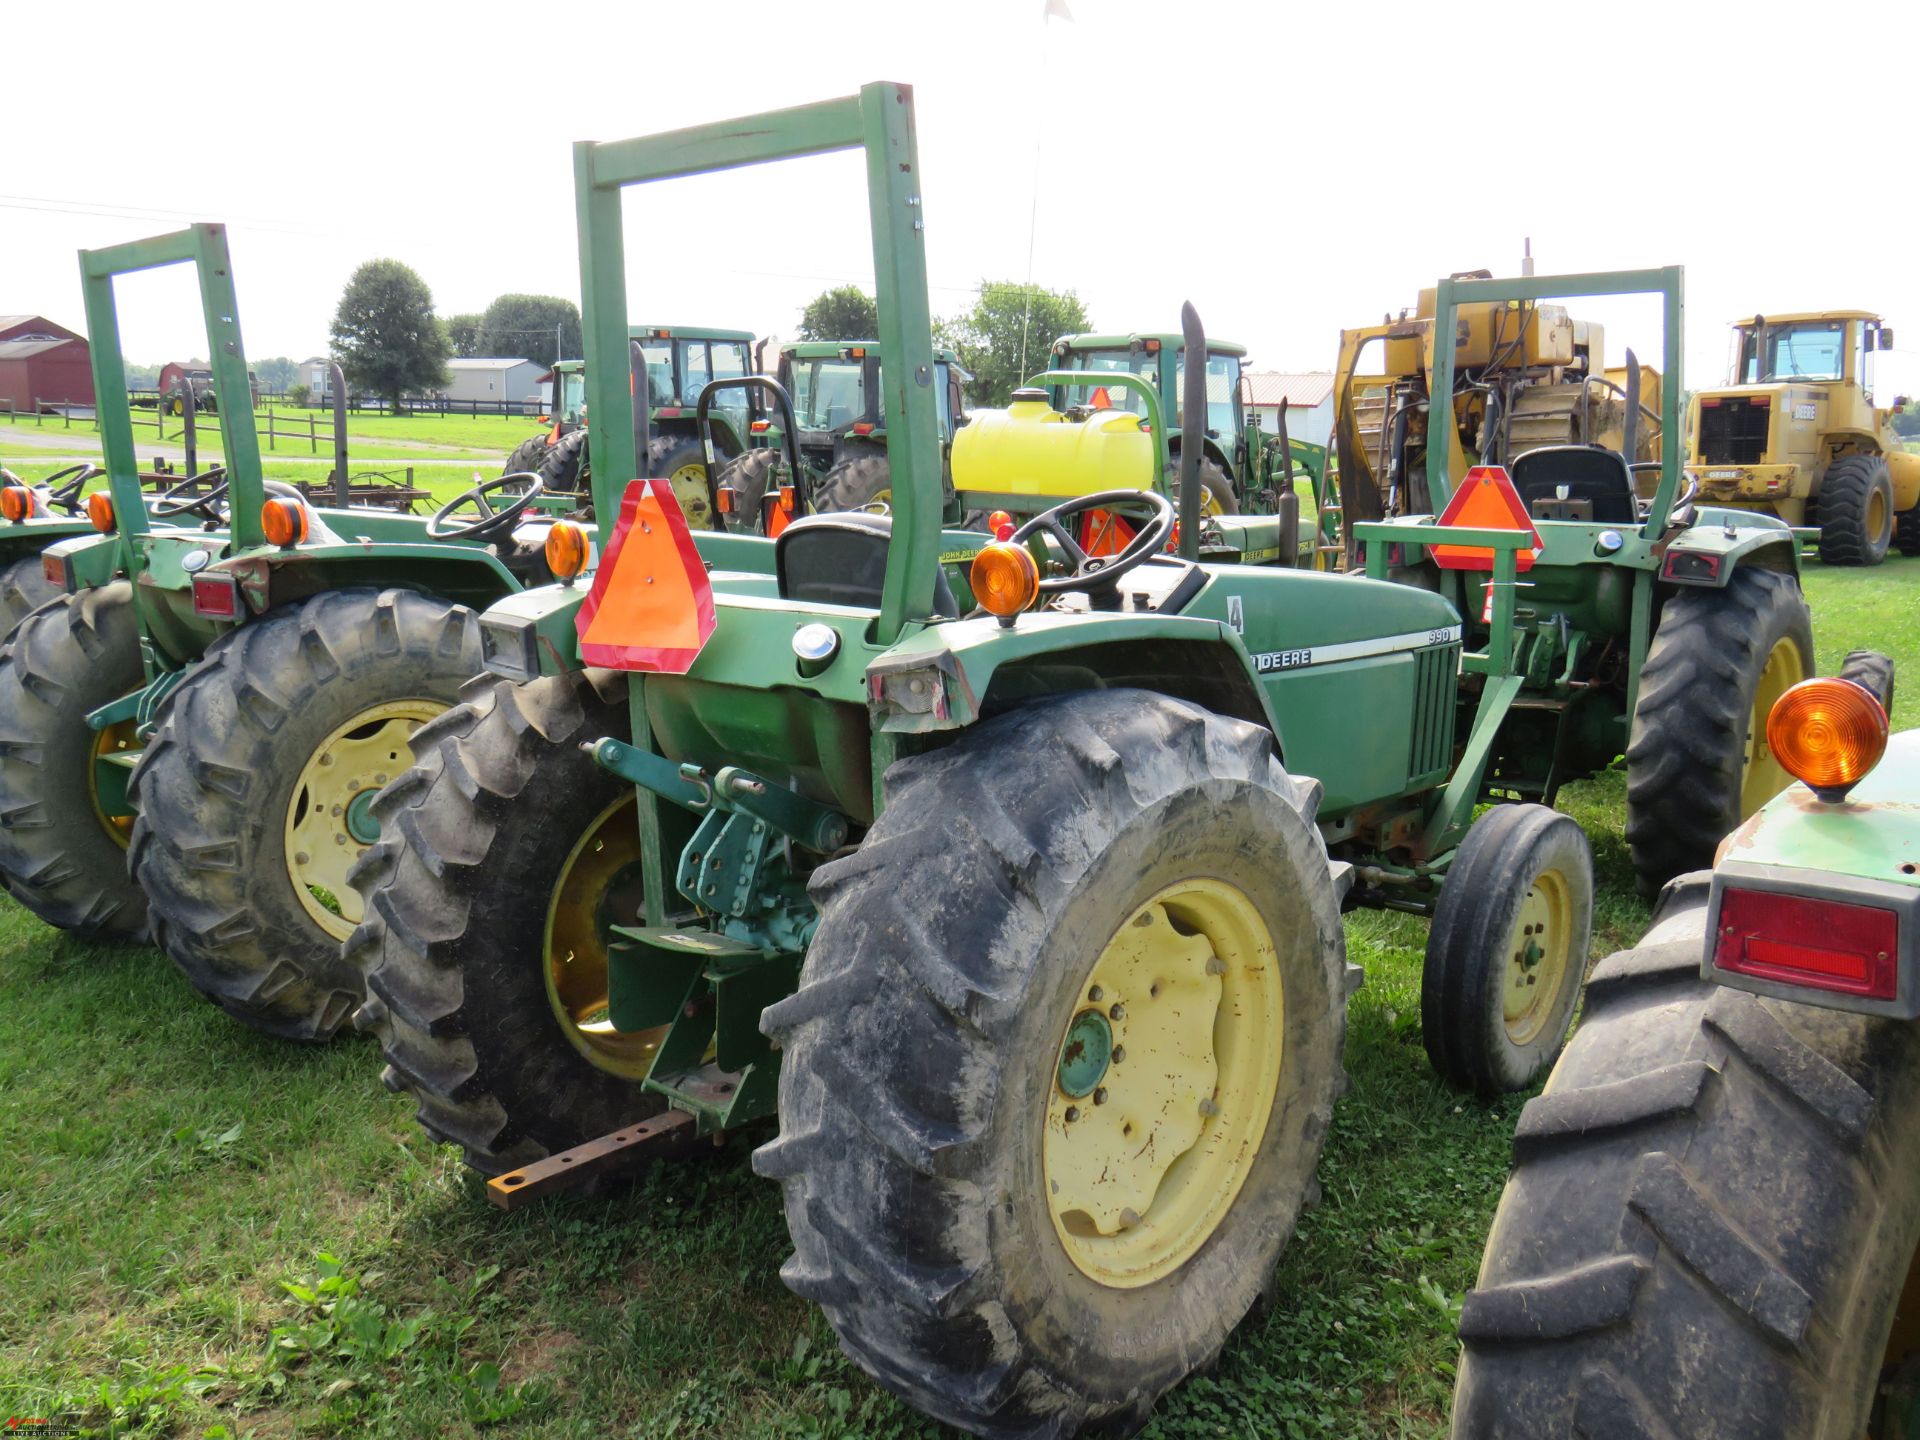 2001 JOHN DEERE 990 TRACTOR, PTO, NO 3PT ARMS, 14.9-24 TIRES, 5555 HOURS SHOWING (HOURS SUBJECT TO - Image 3 of 8